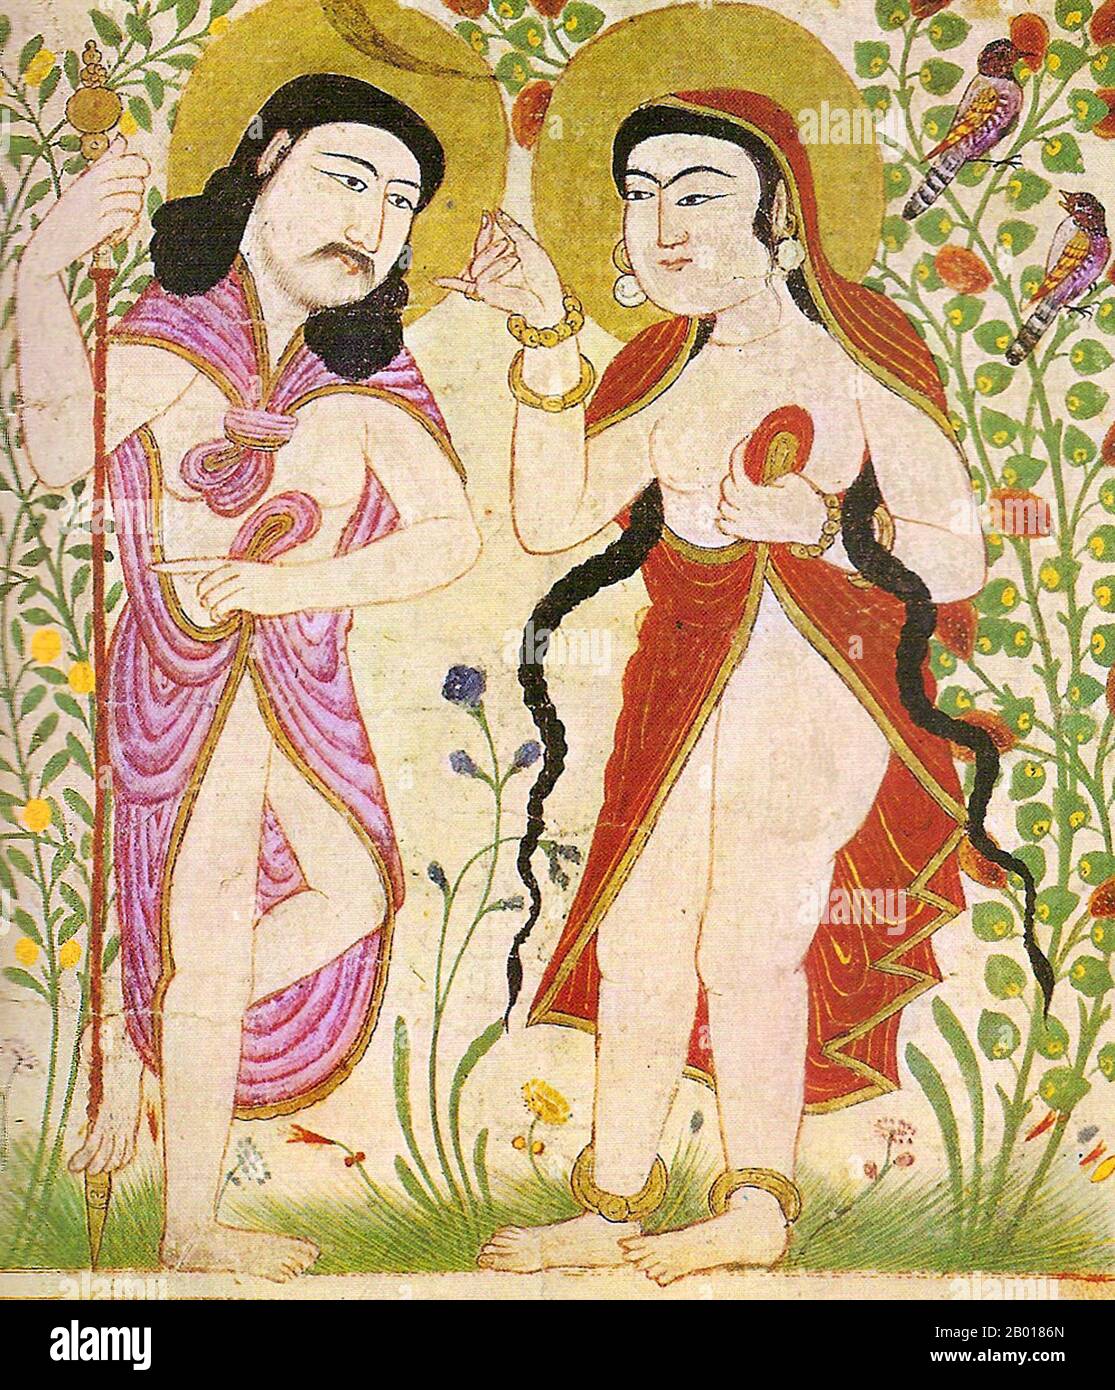 Iran: Adam and Hawwa (the Islamic Adam and Eve) as depicted in 'Manafi al-Hayawan' (Useful Animals) by Ibn Bakhitshu (fl. 13th century), 1294-1299 (Ilkhanid Era).  Abu Said Ubaud Allah Ibn Bakhitshu's 'Manafi al-Hayawan' is an illustrated bestiary in the Persian language. The Bakhtshooa Gondishapoori (also spelled Bukhtishu and Bukht-Yishu) were Assyrian Nestorian Christian physicians from the 7th, 8th, and 9th centuries, spanning 6 generations and 250 years. Some of them served as the personal physicians of Caliphs. Stock Photo